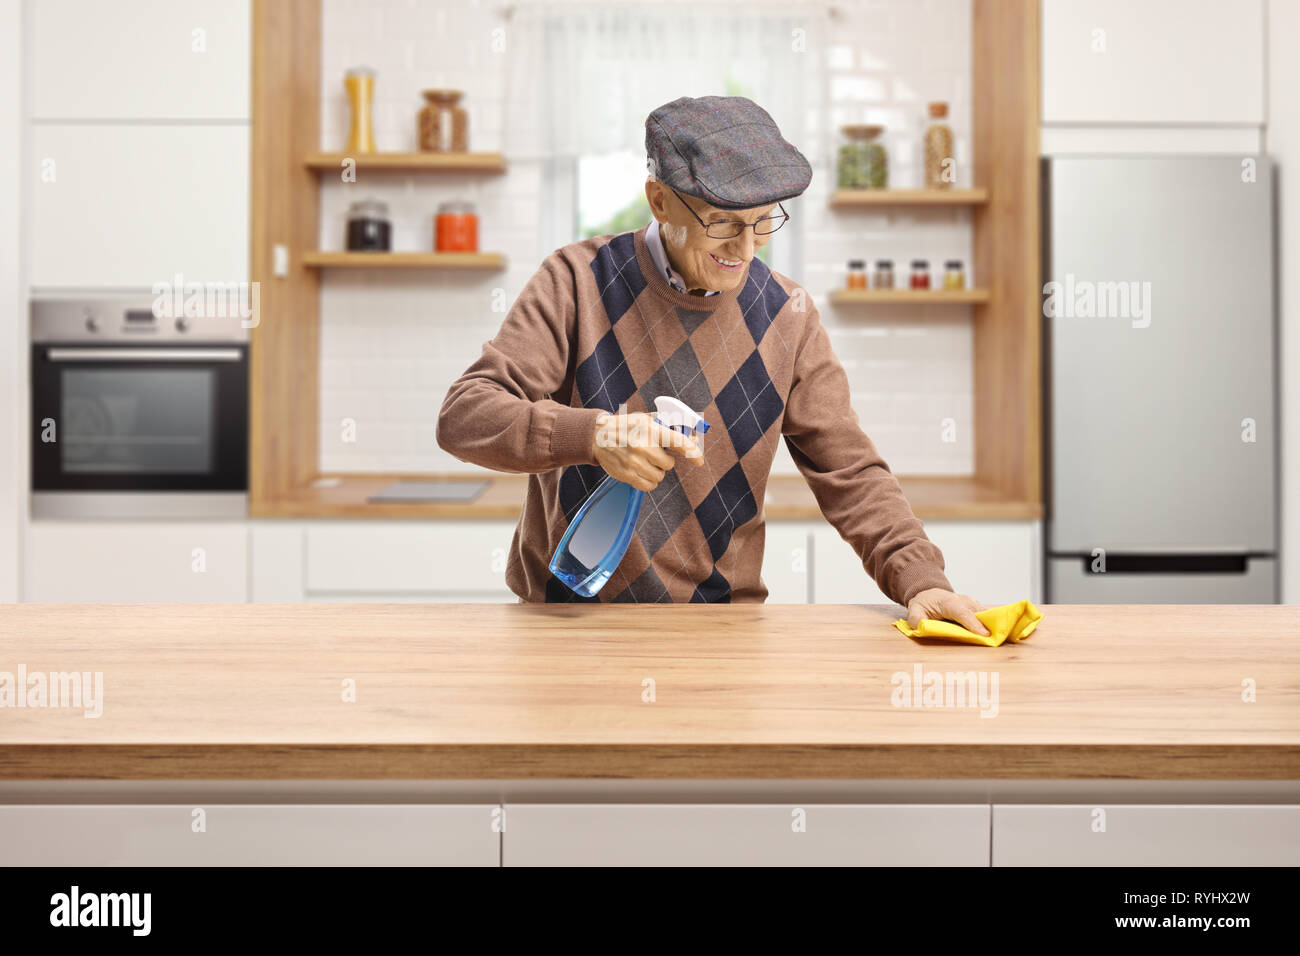 Elderly man cleaning a wooden counter in a kitchen Stock Photo